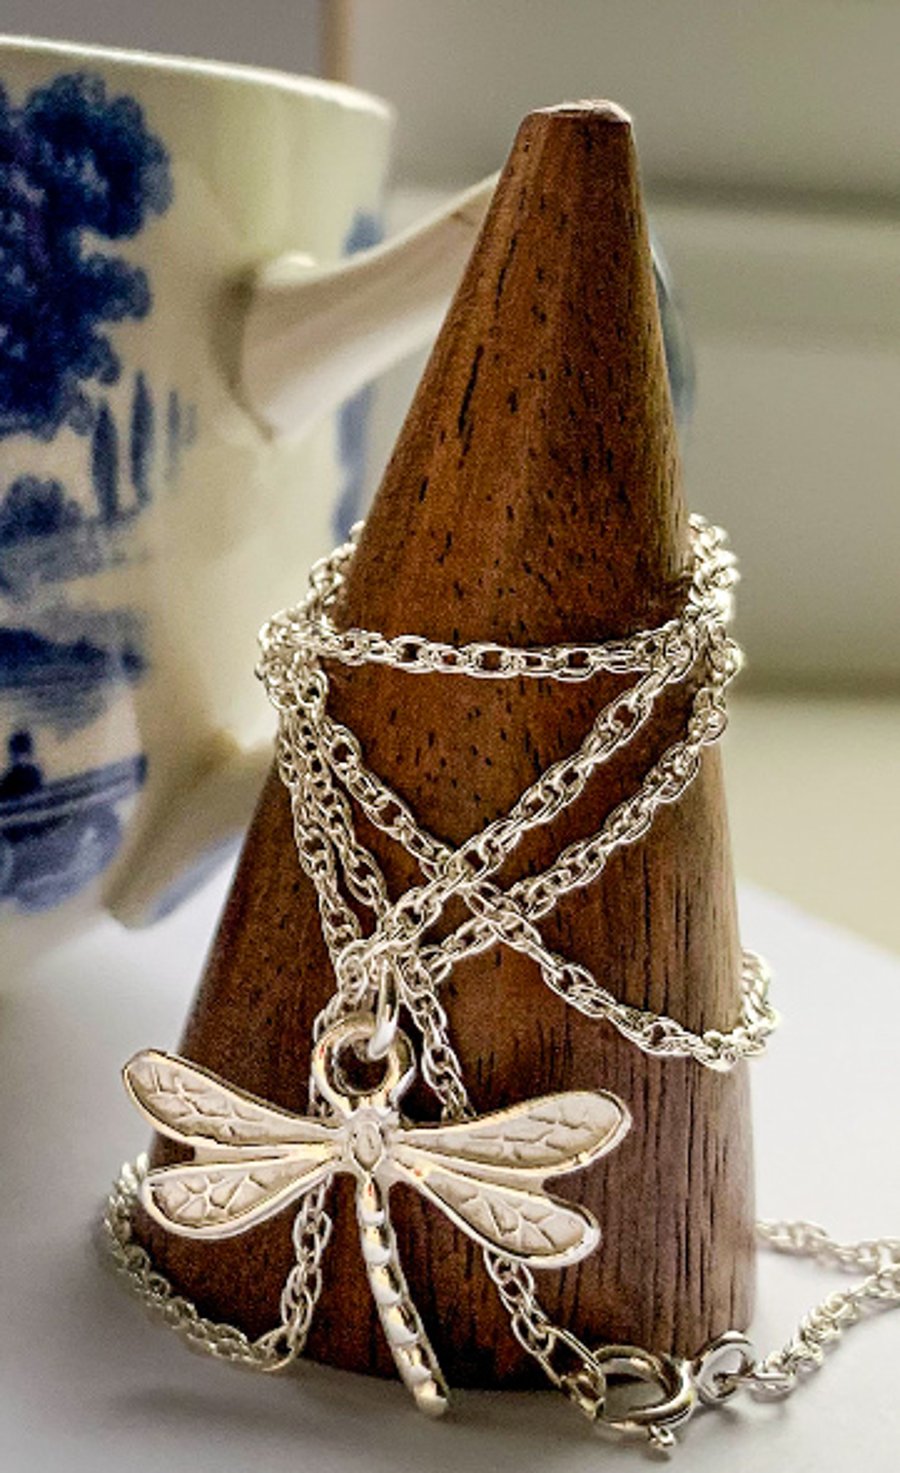 Dragonfly pendant necklace